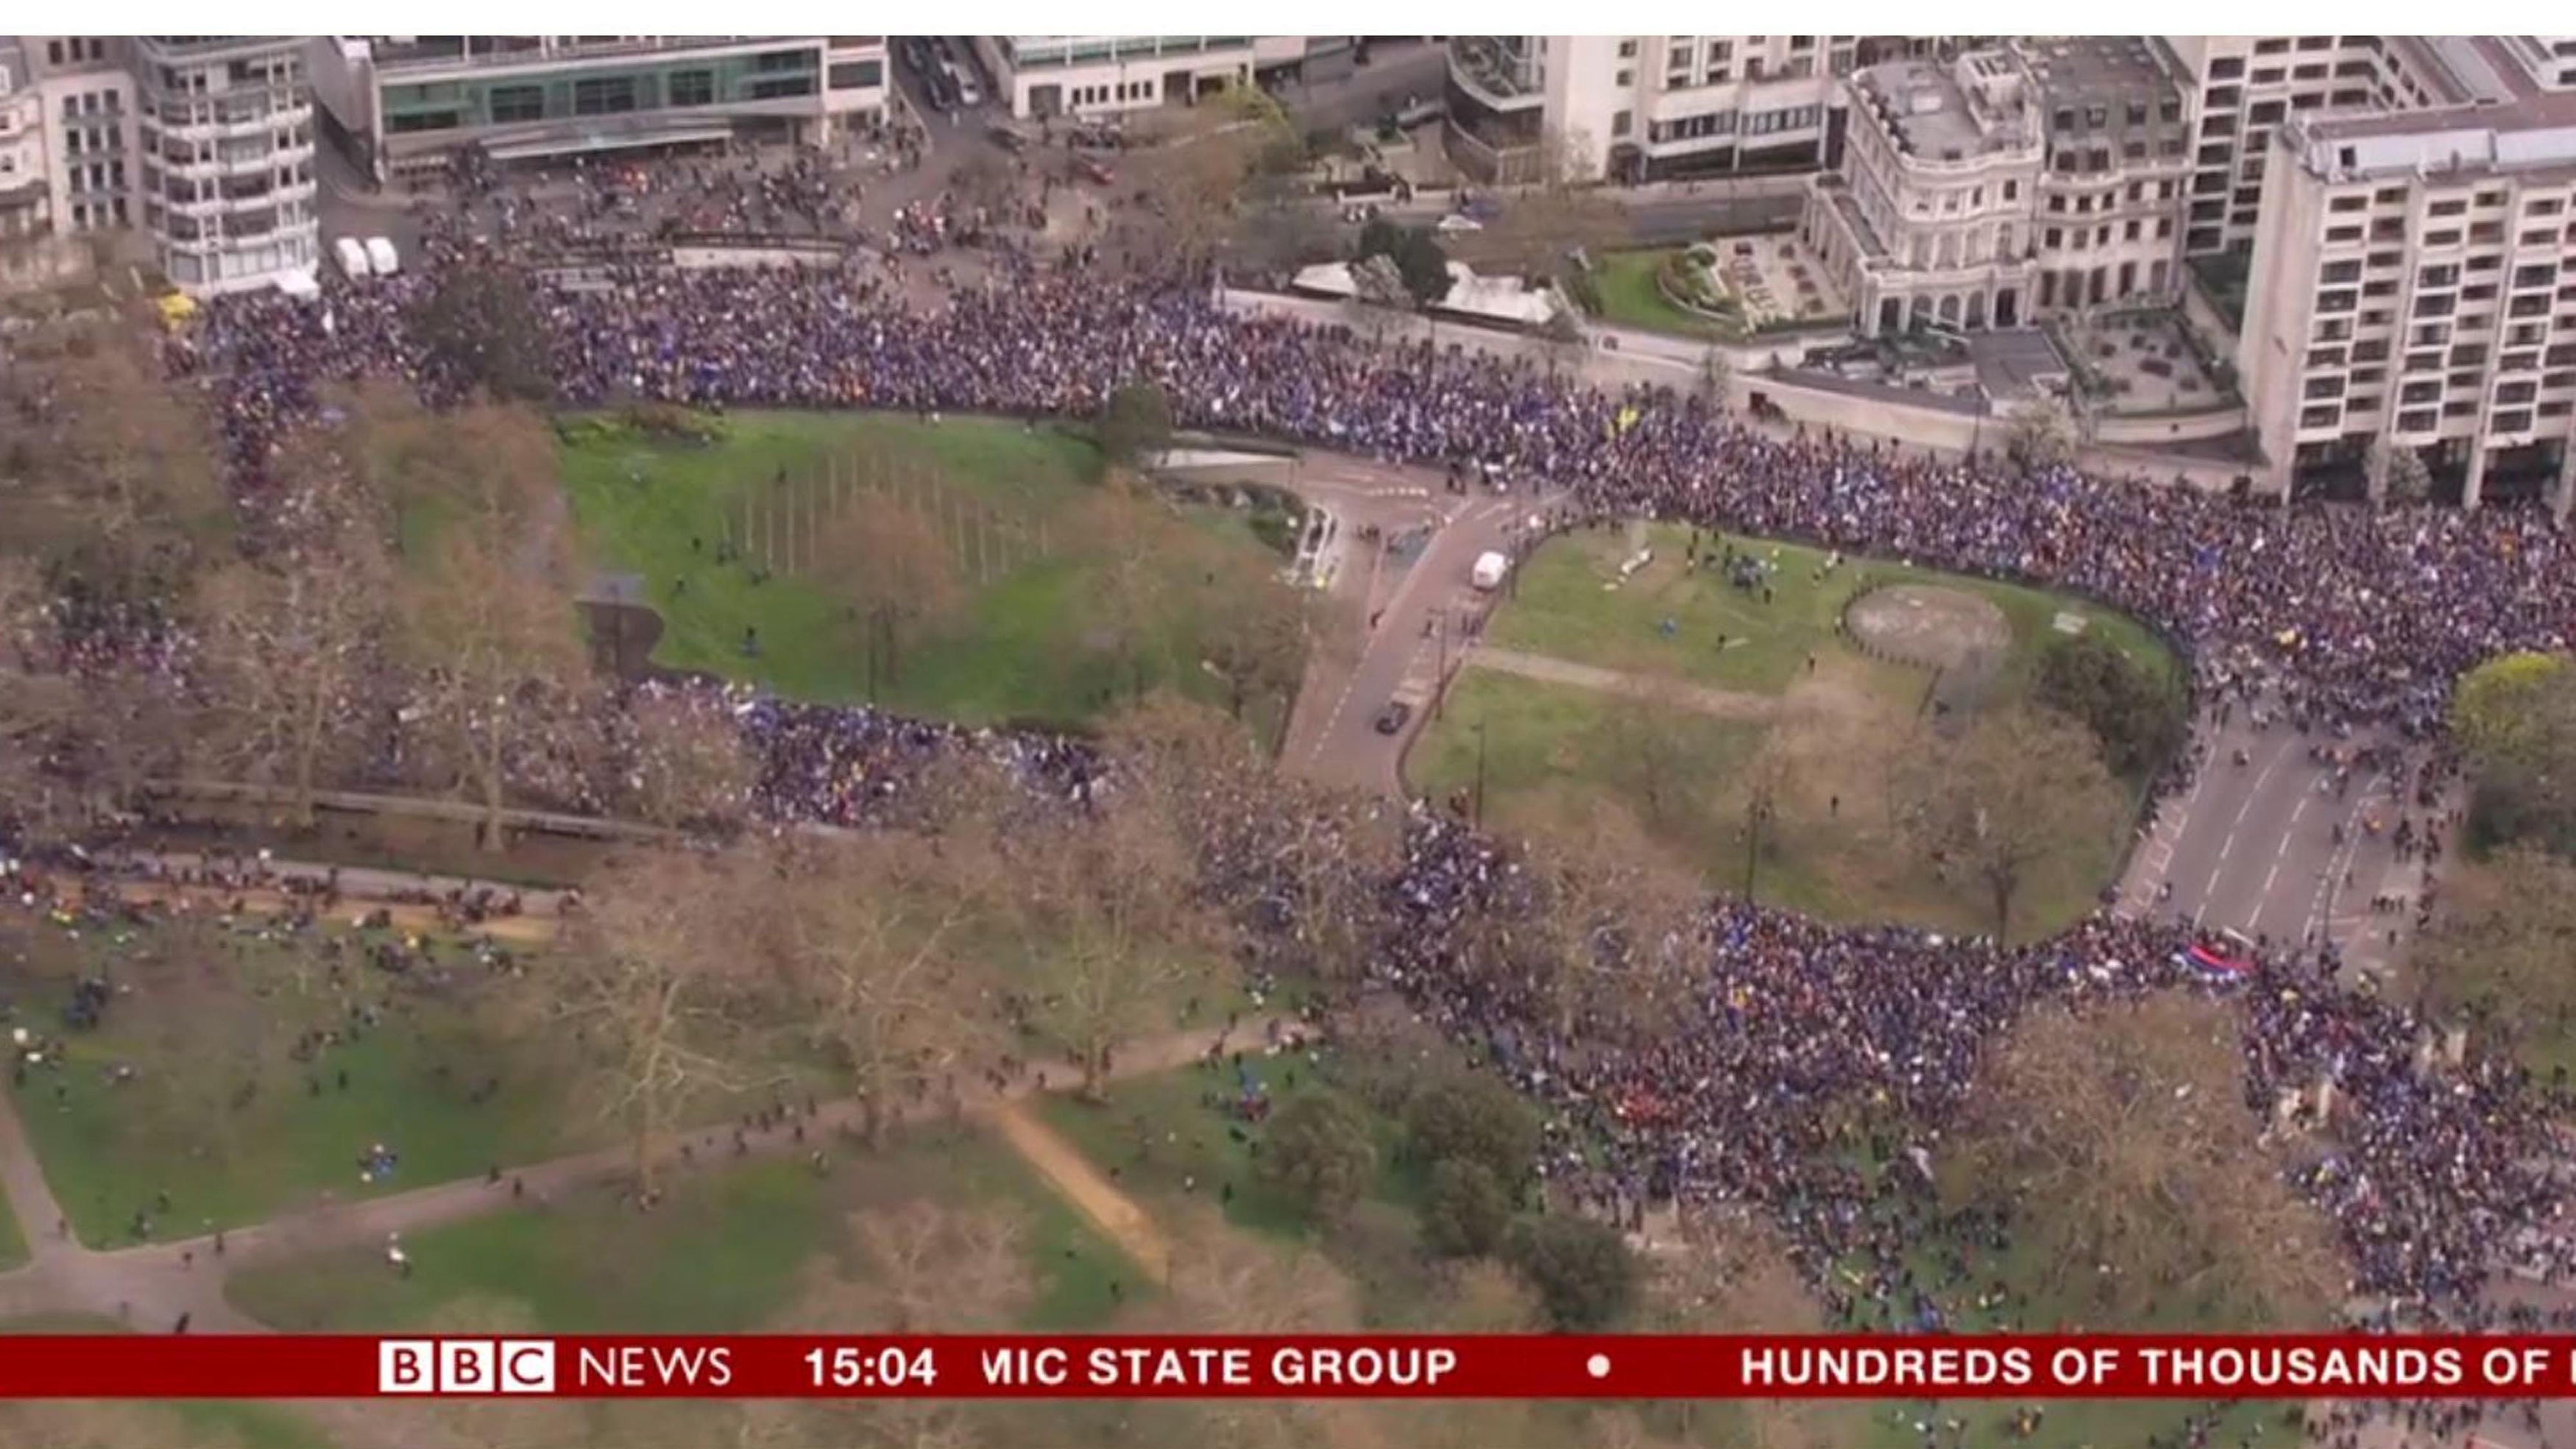 An aerial view of marchers supporting a People's Vote in London  